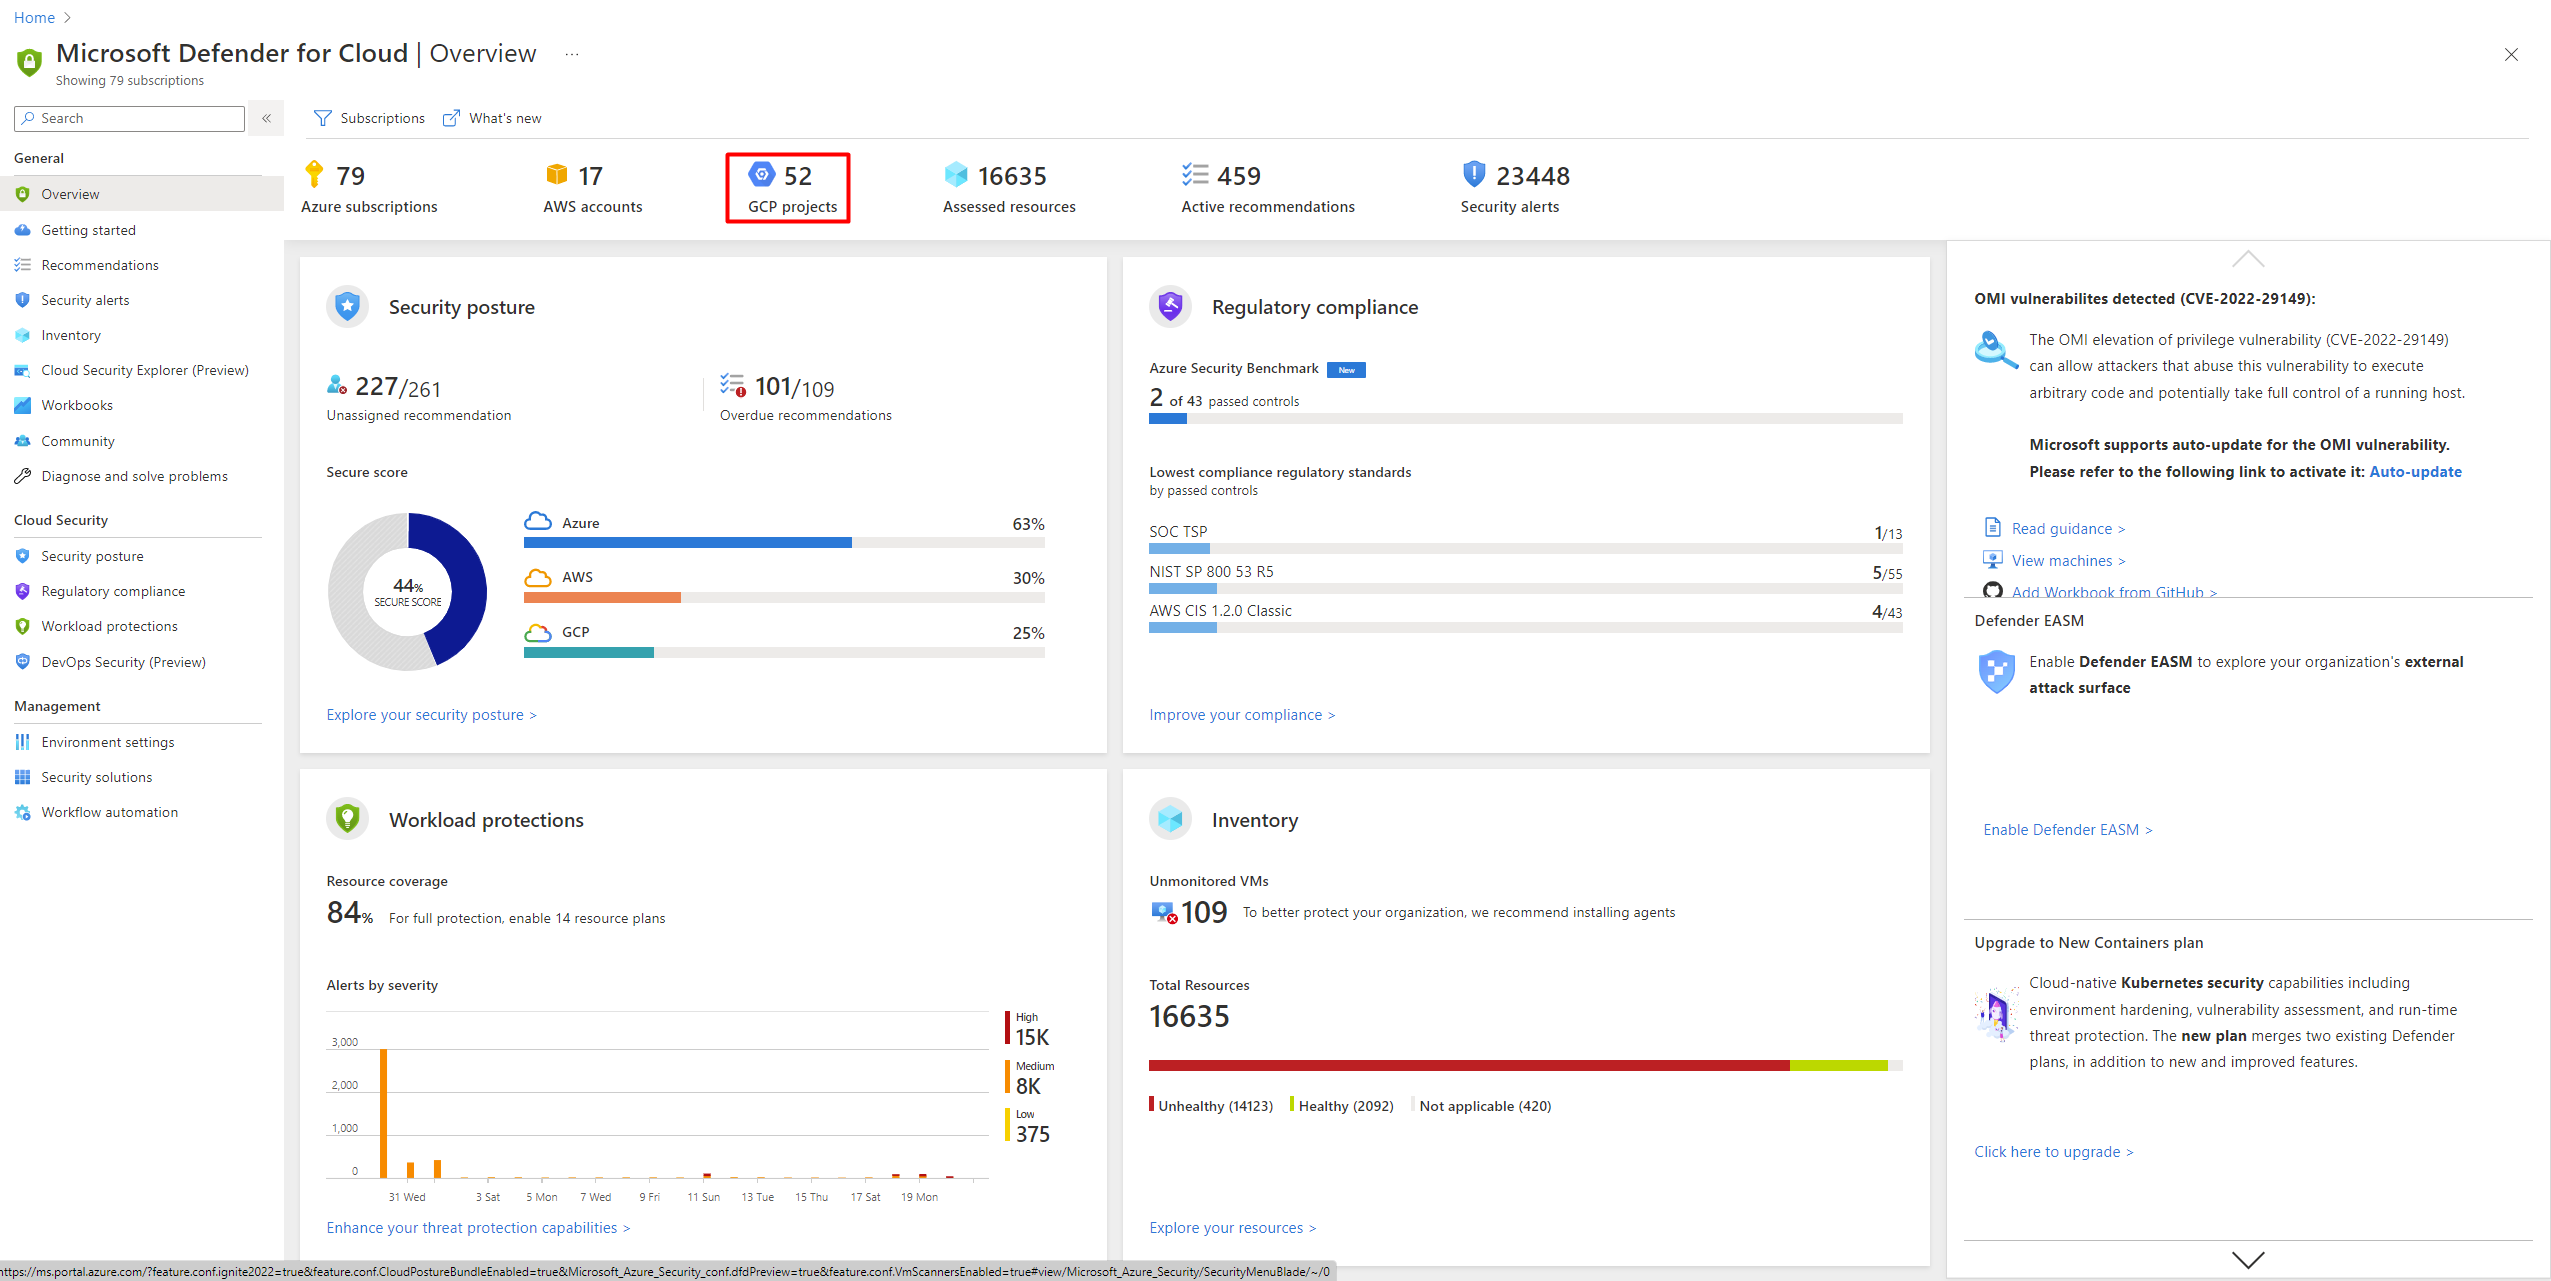 Screenshot of GCP projects shown in Microsoft Defender for Cloud's overview dashboard.